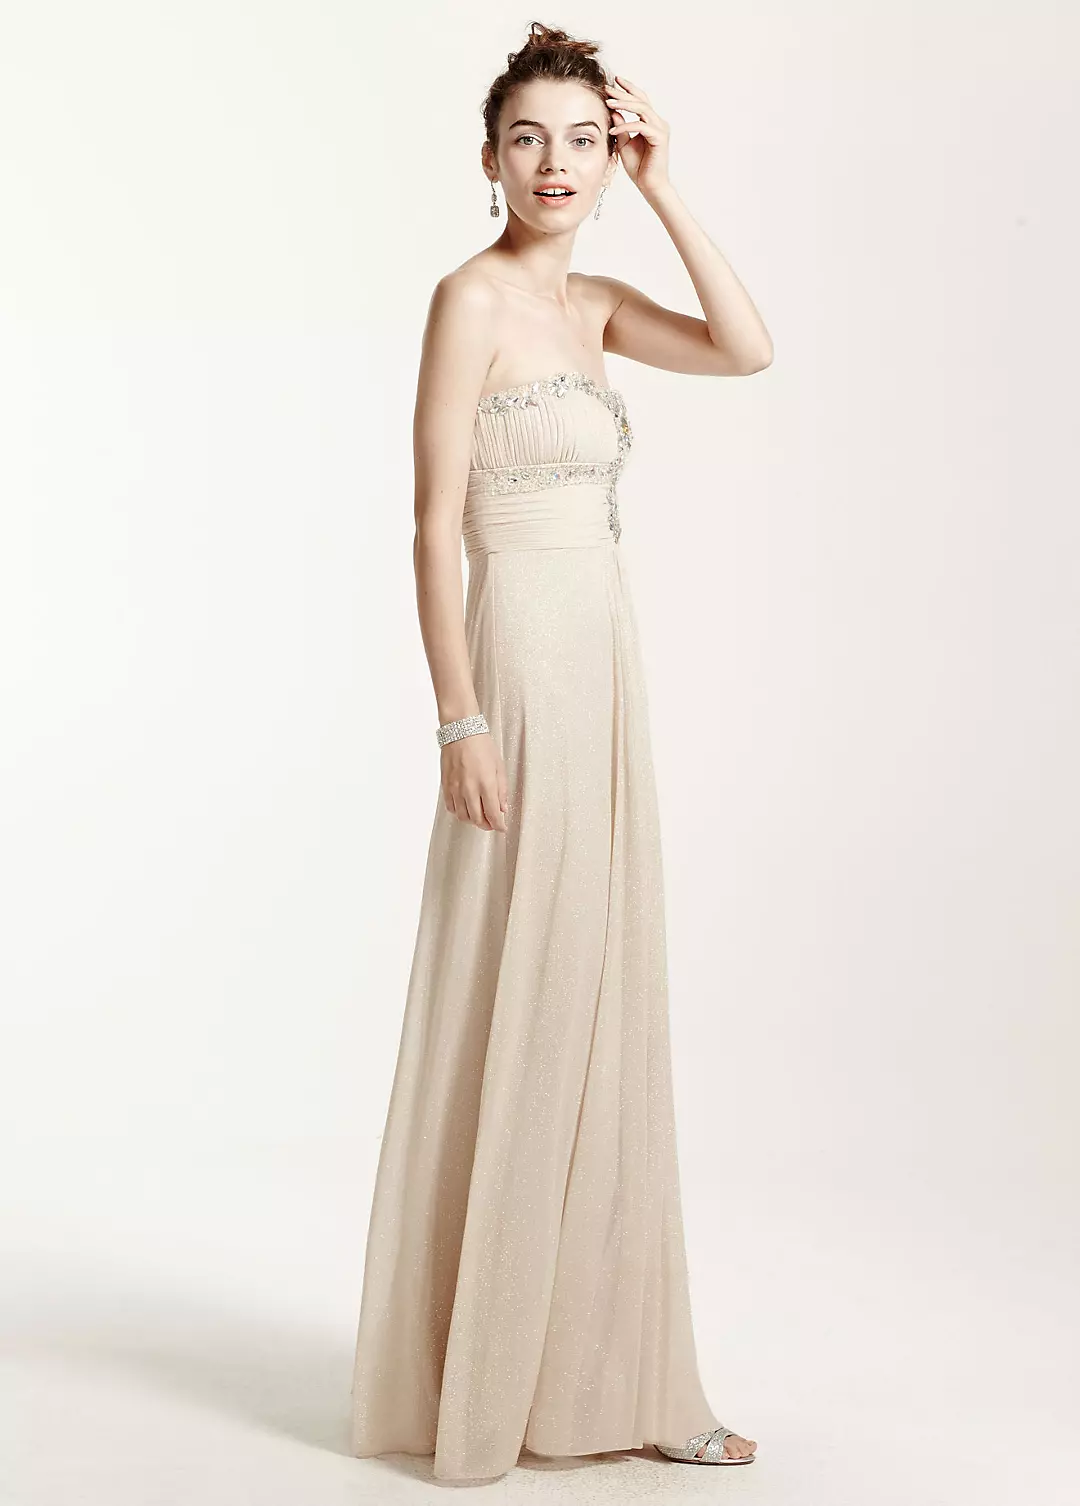 Strapless Glitter Jersey Dress with Shirred Bodice Image 3